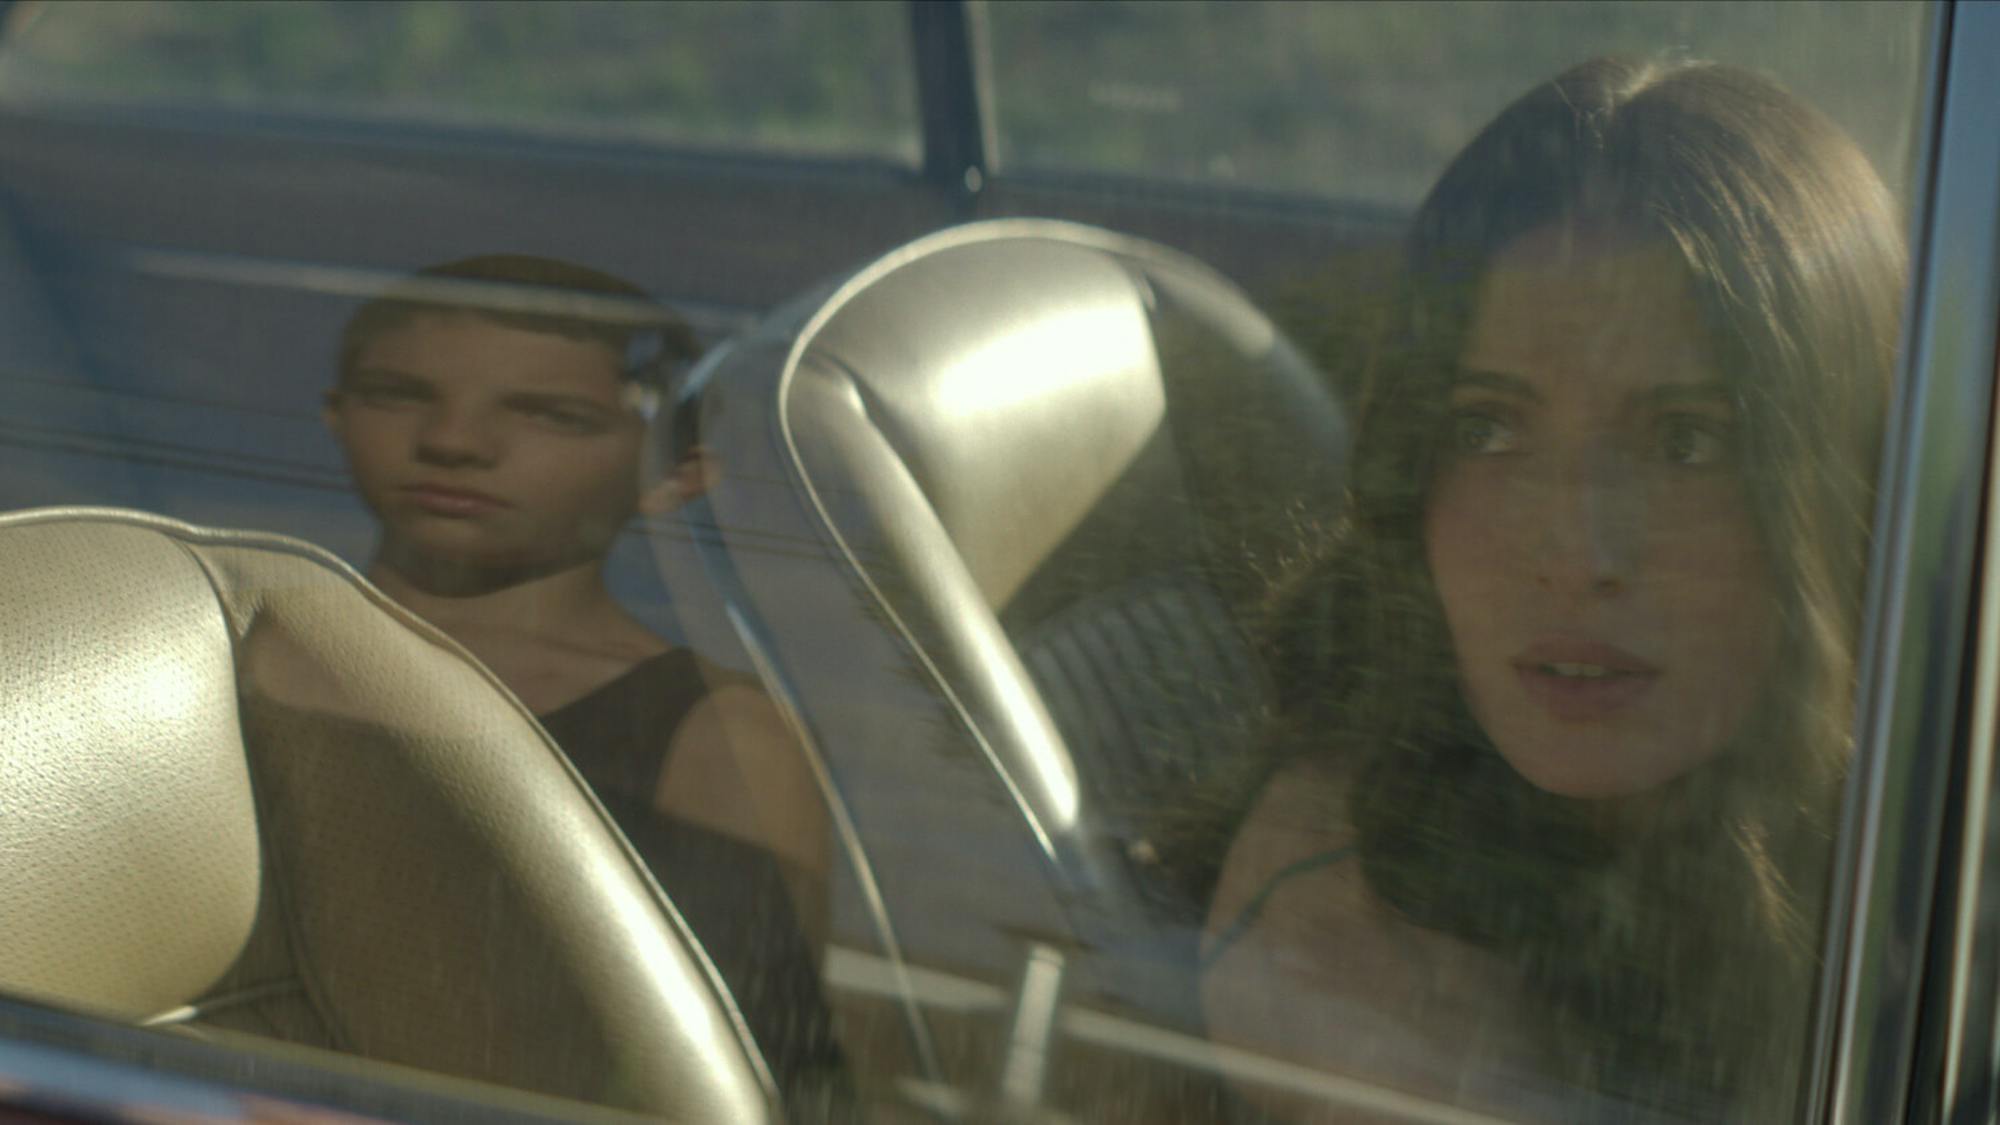 David (Emilio Vodanovich) and Amanda (María Valverde) look at each other through the car window. David appears as a reflection in the window, and Amanda looks nervous.